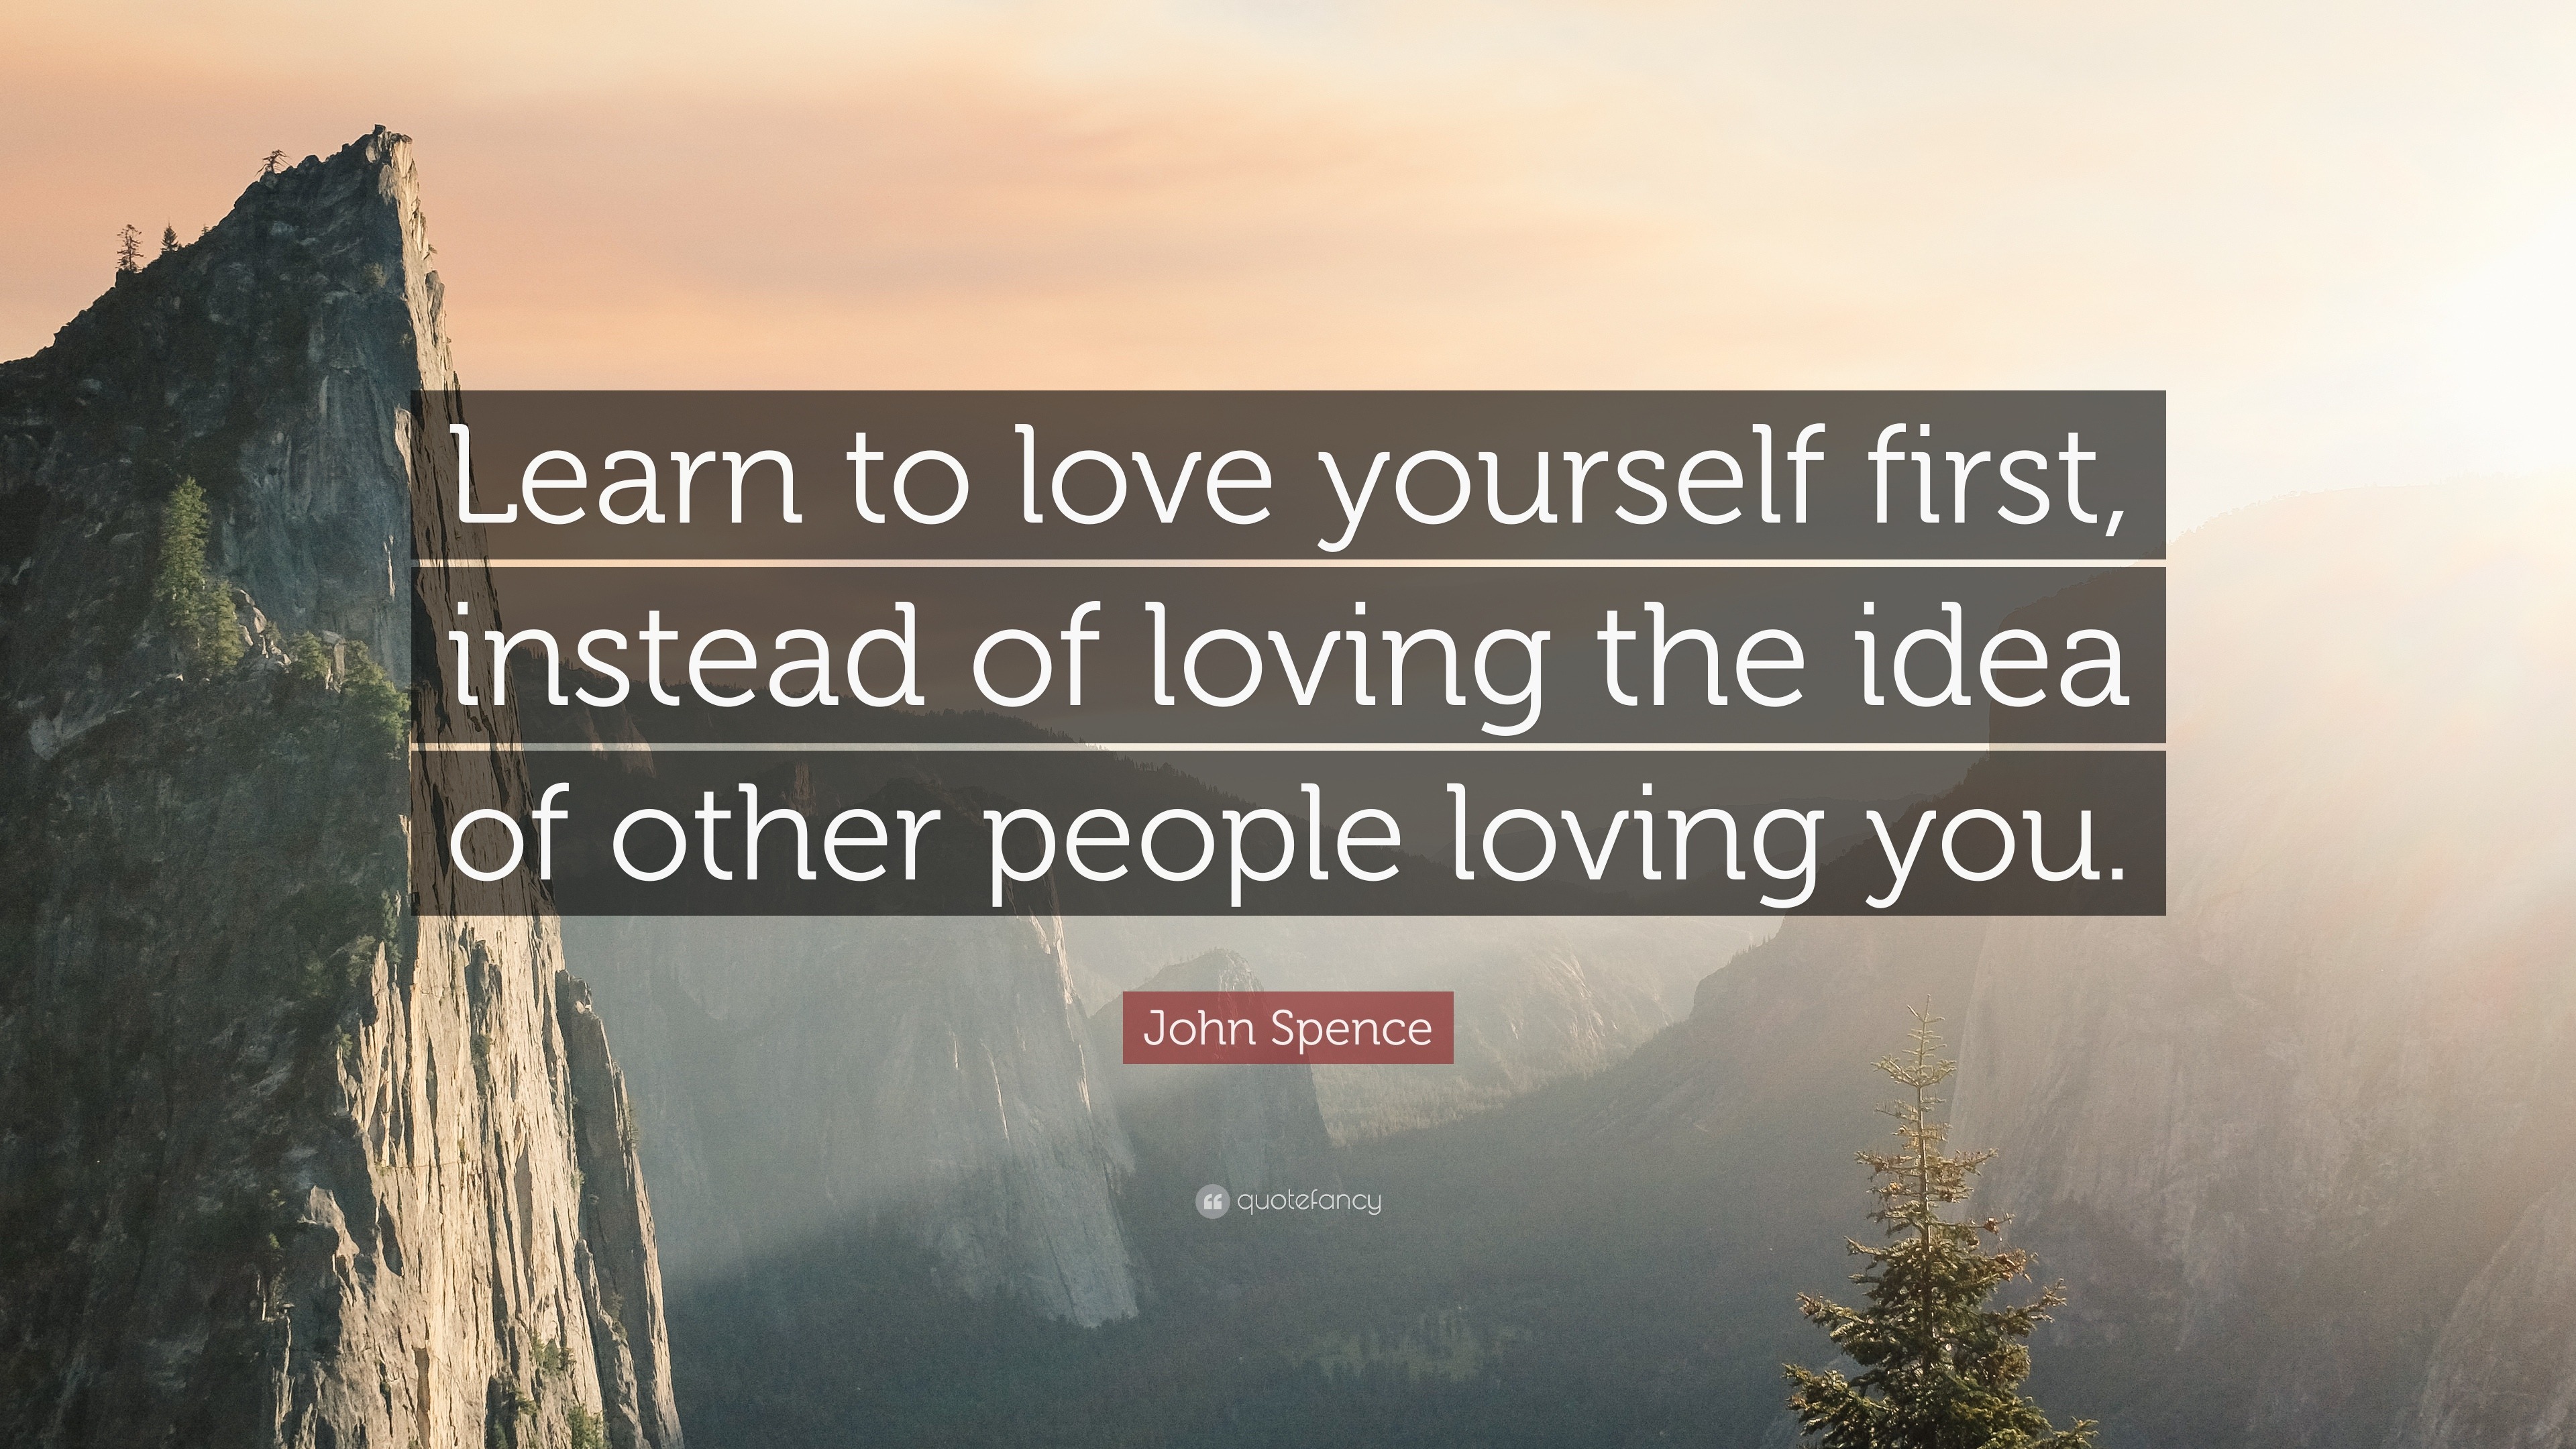 John Spence Quote: "Learn to love yourself first, instead ...